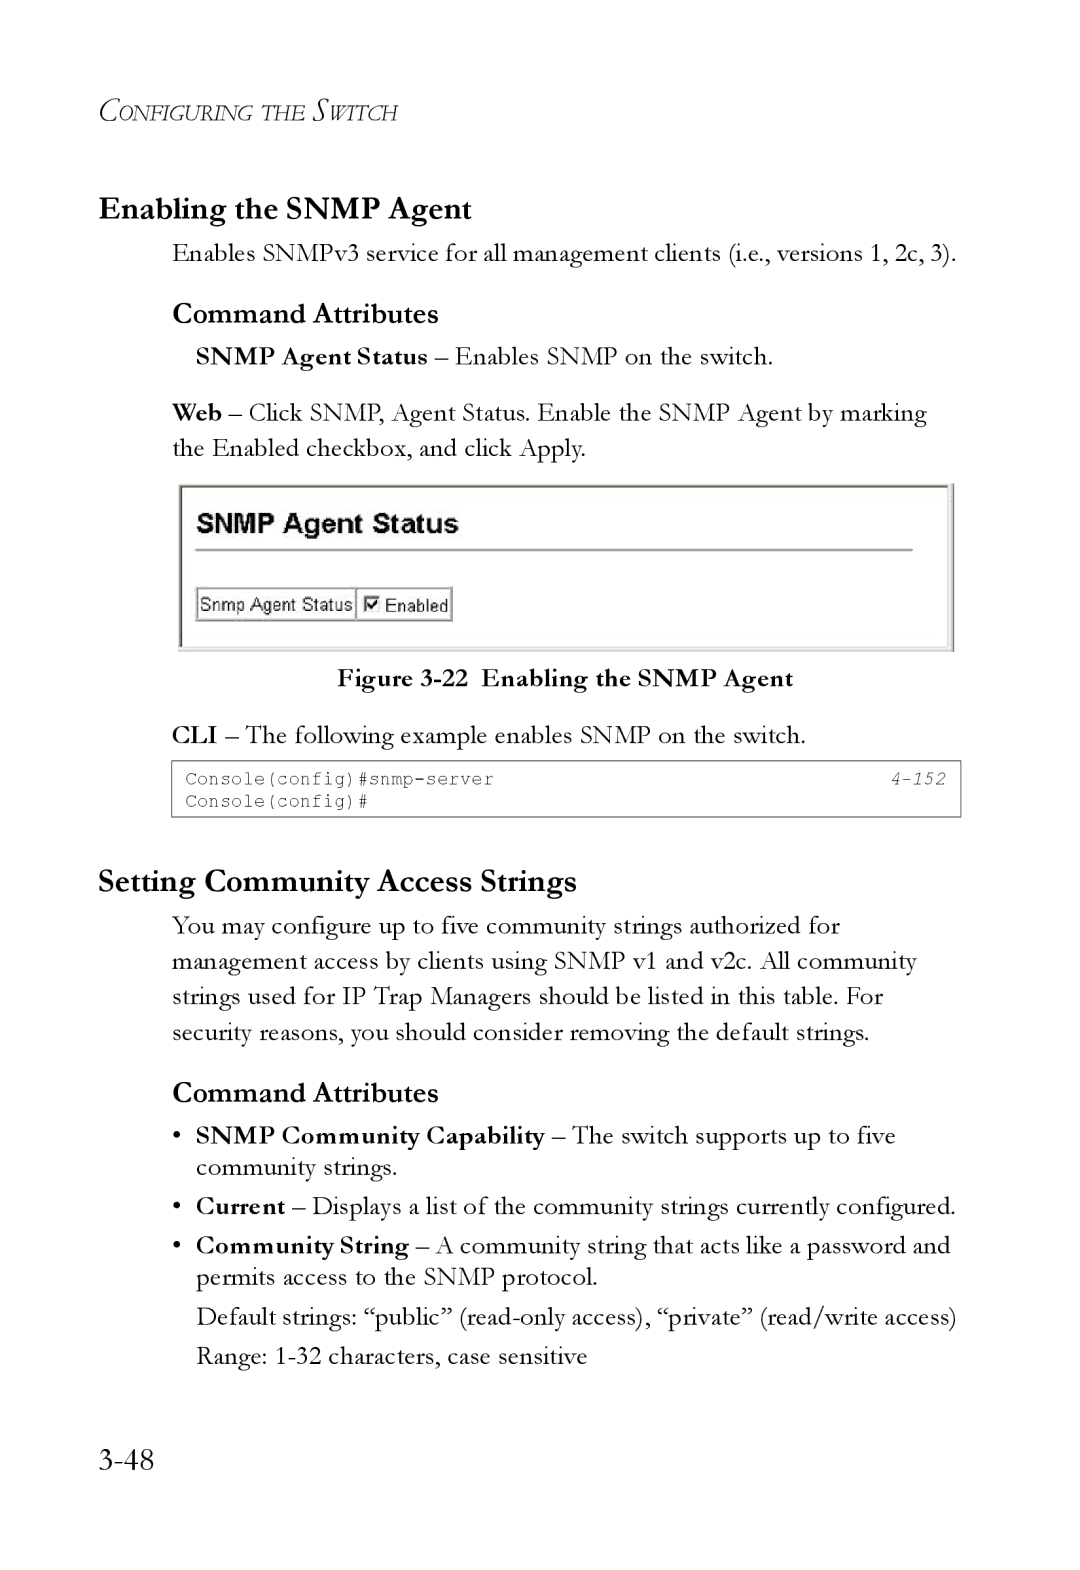 SMC Networks SMC6824M manual Enabling the Snmp Agent, Setting Community Access Strings 